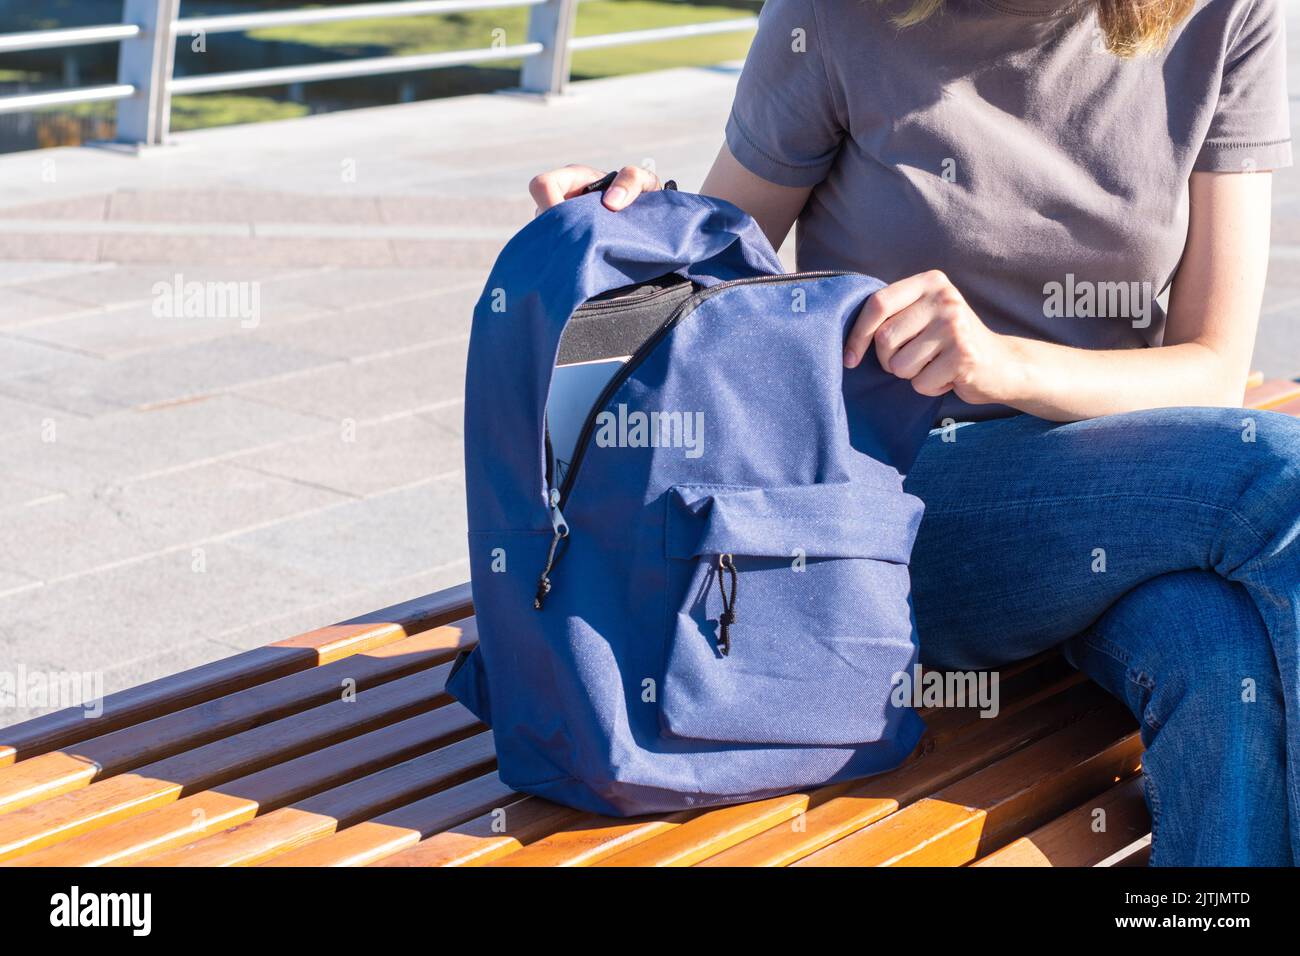 Women's hands zip up an orange school backpack with school supplies, books, an office, a laptop, on a park bench. The concept of Back to School. Stock Photo